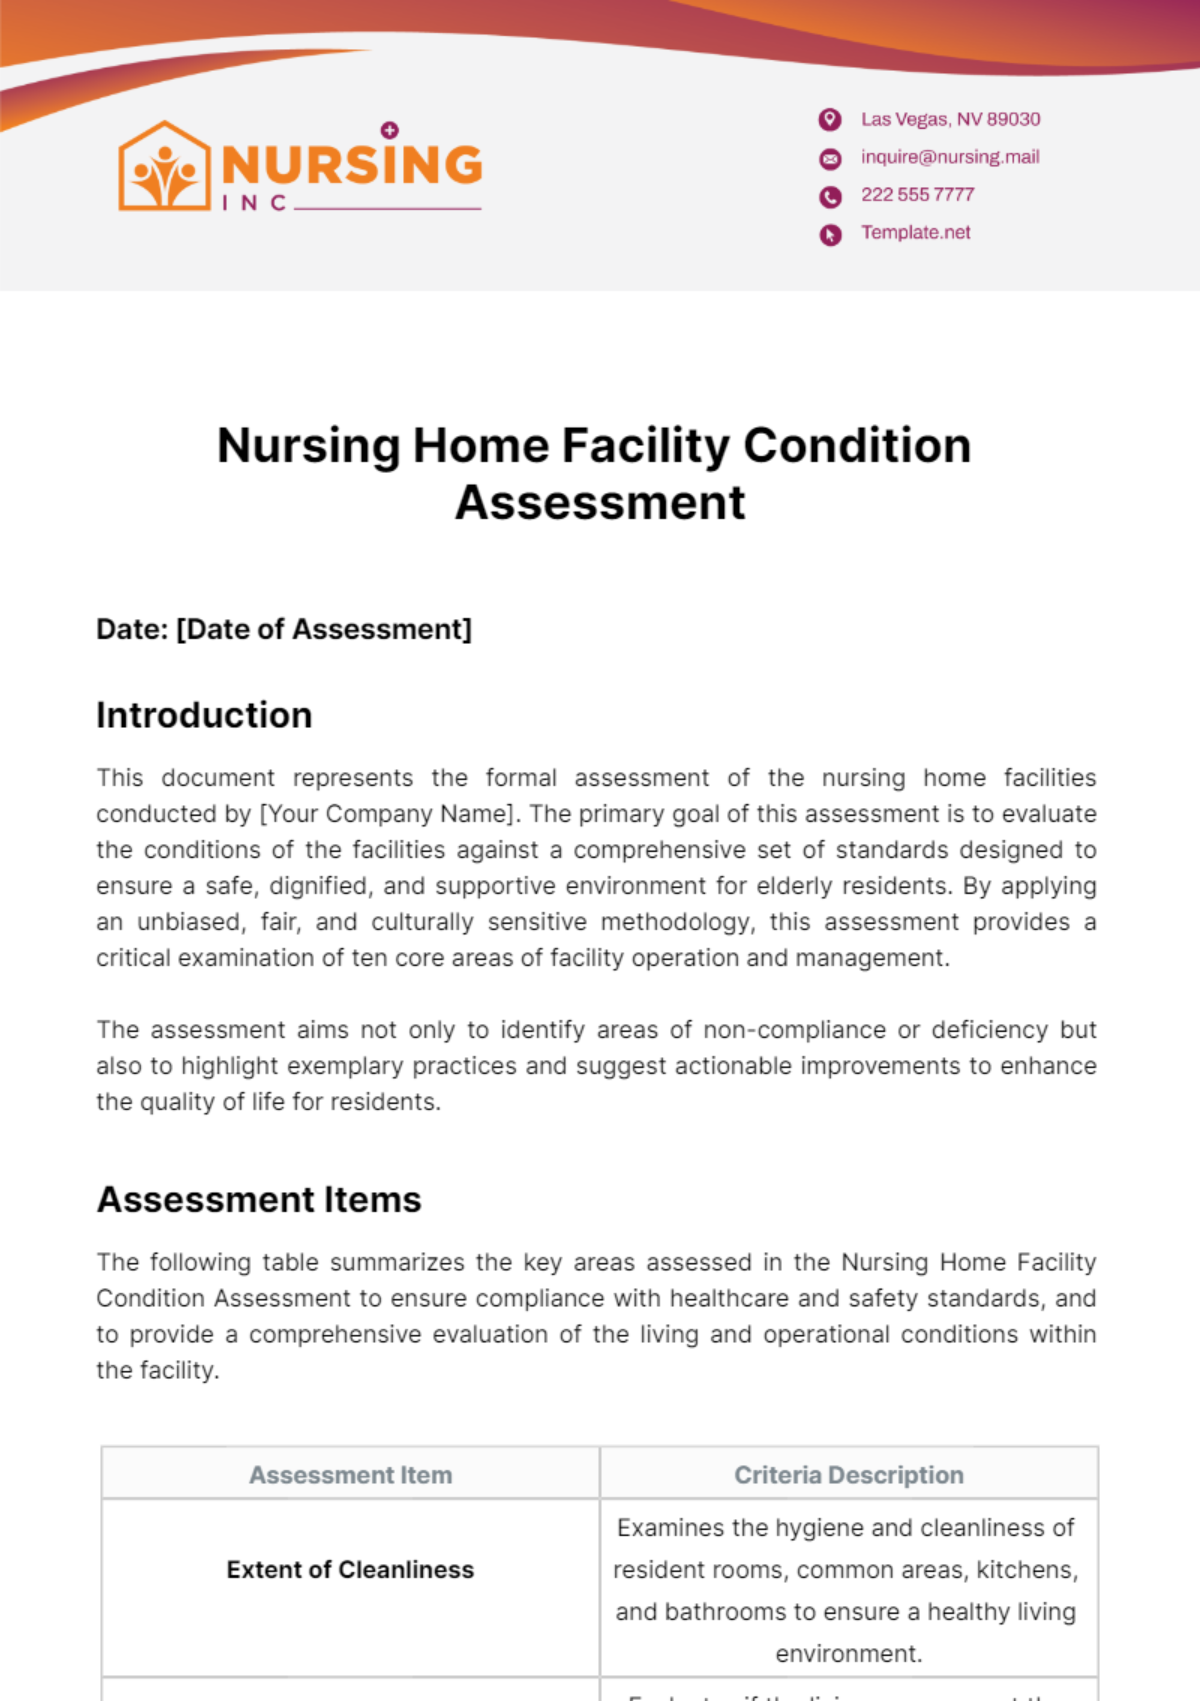 Nursing Home Facility Condition Assessment Template